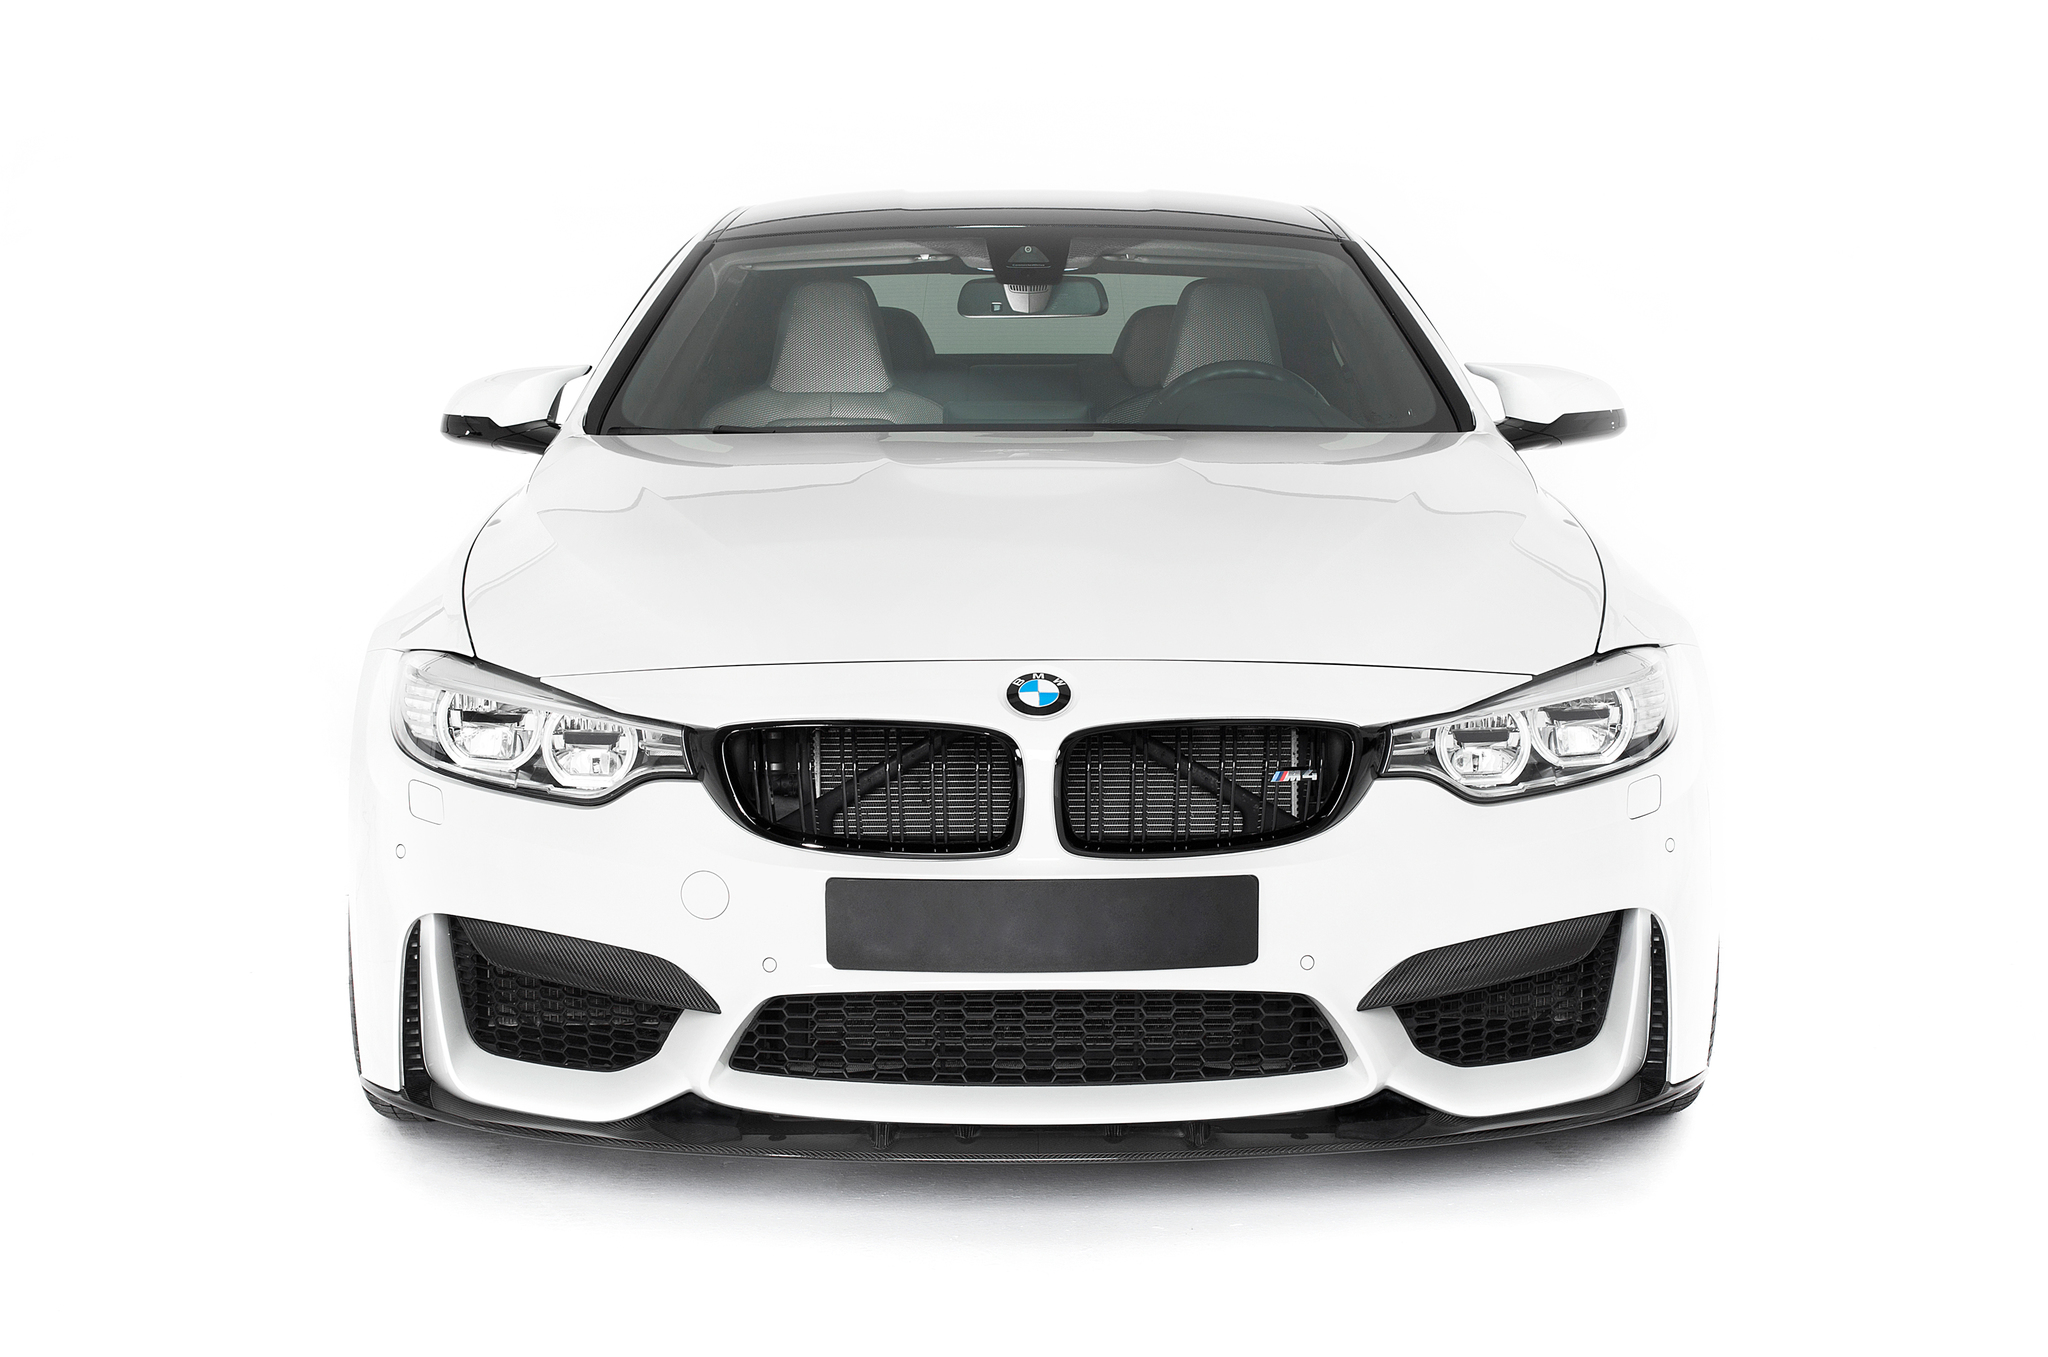 Sterckenn Carbon Fiber front covers for BMW M3 F80 latest model